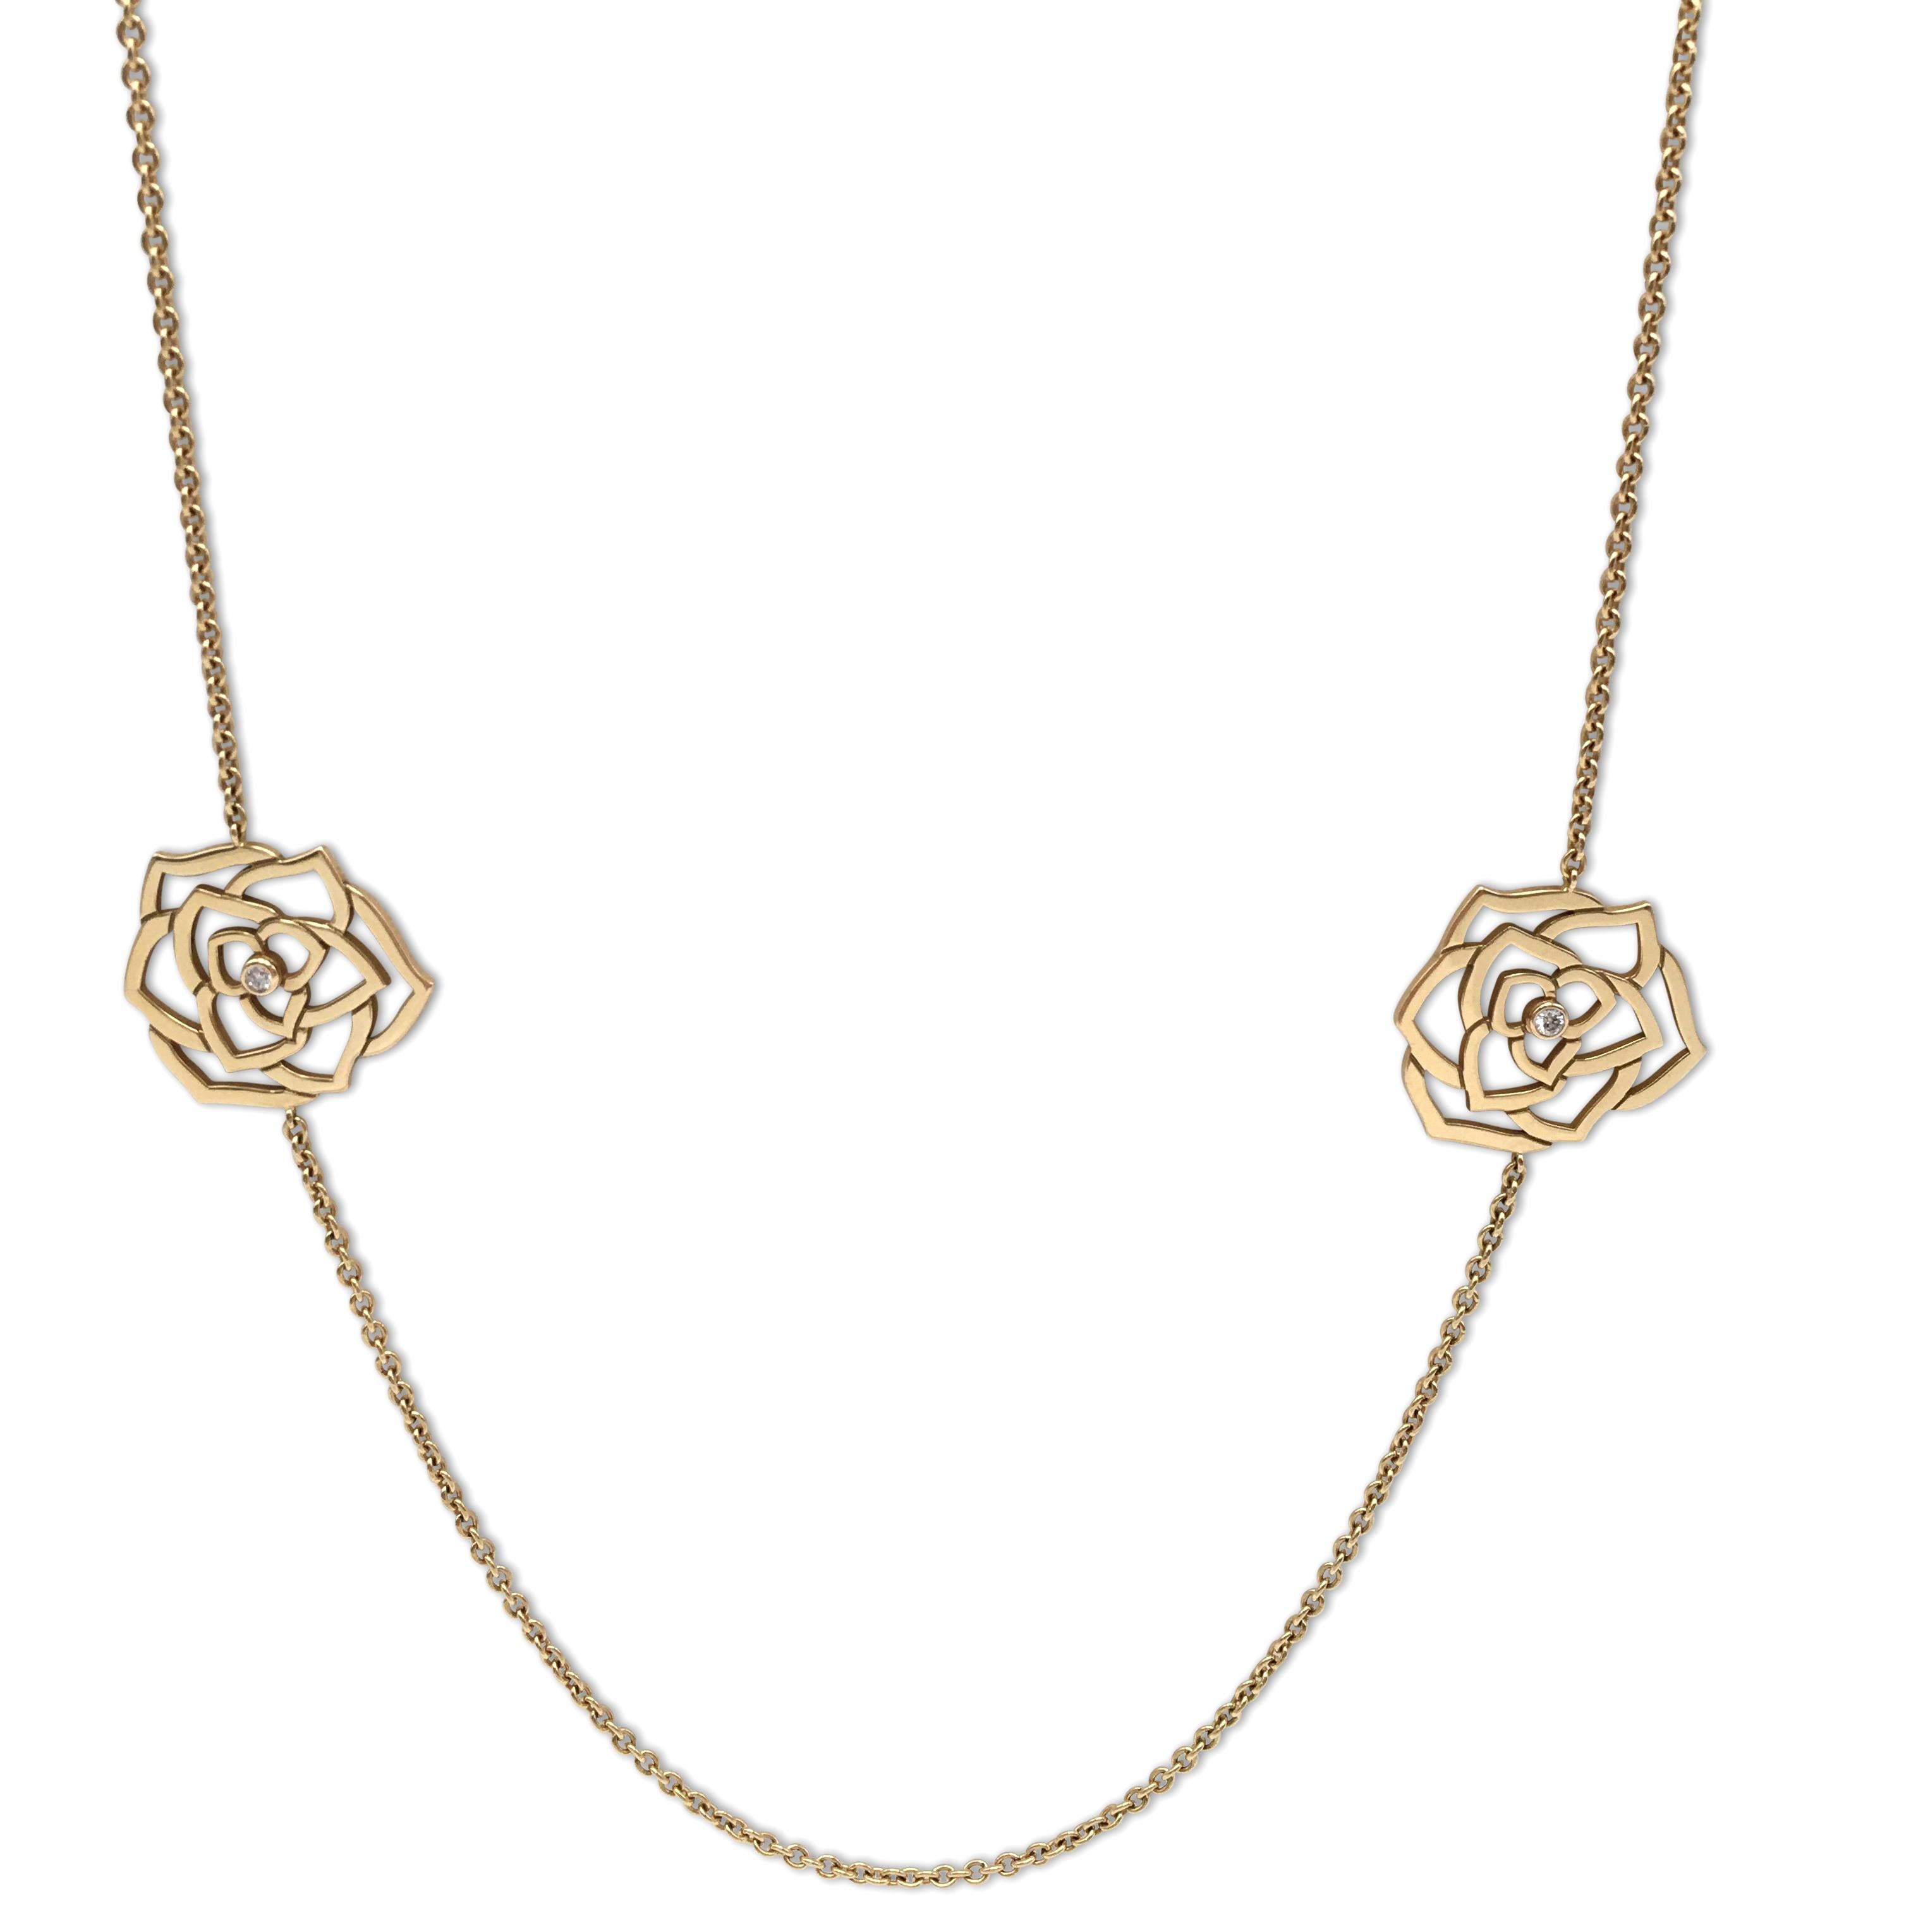 Authentic Piaget necklace from the Rose Collection. Crafted in 18 karat rose gold, the 45-inch chain features 6 intricate petal motifs each set with a round brilliant cut diamond weighing an estimated 0.18 carats total weight. Signed Piaget, Au750,